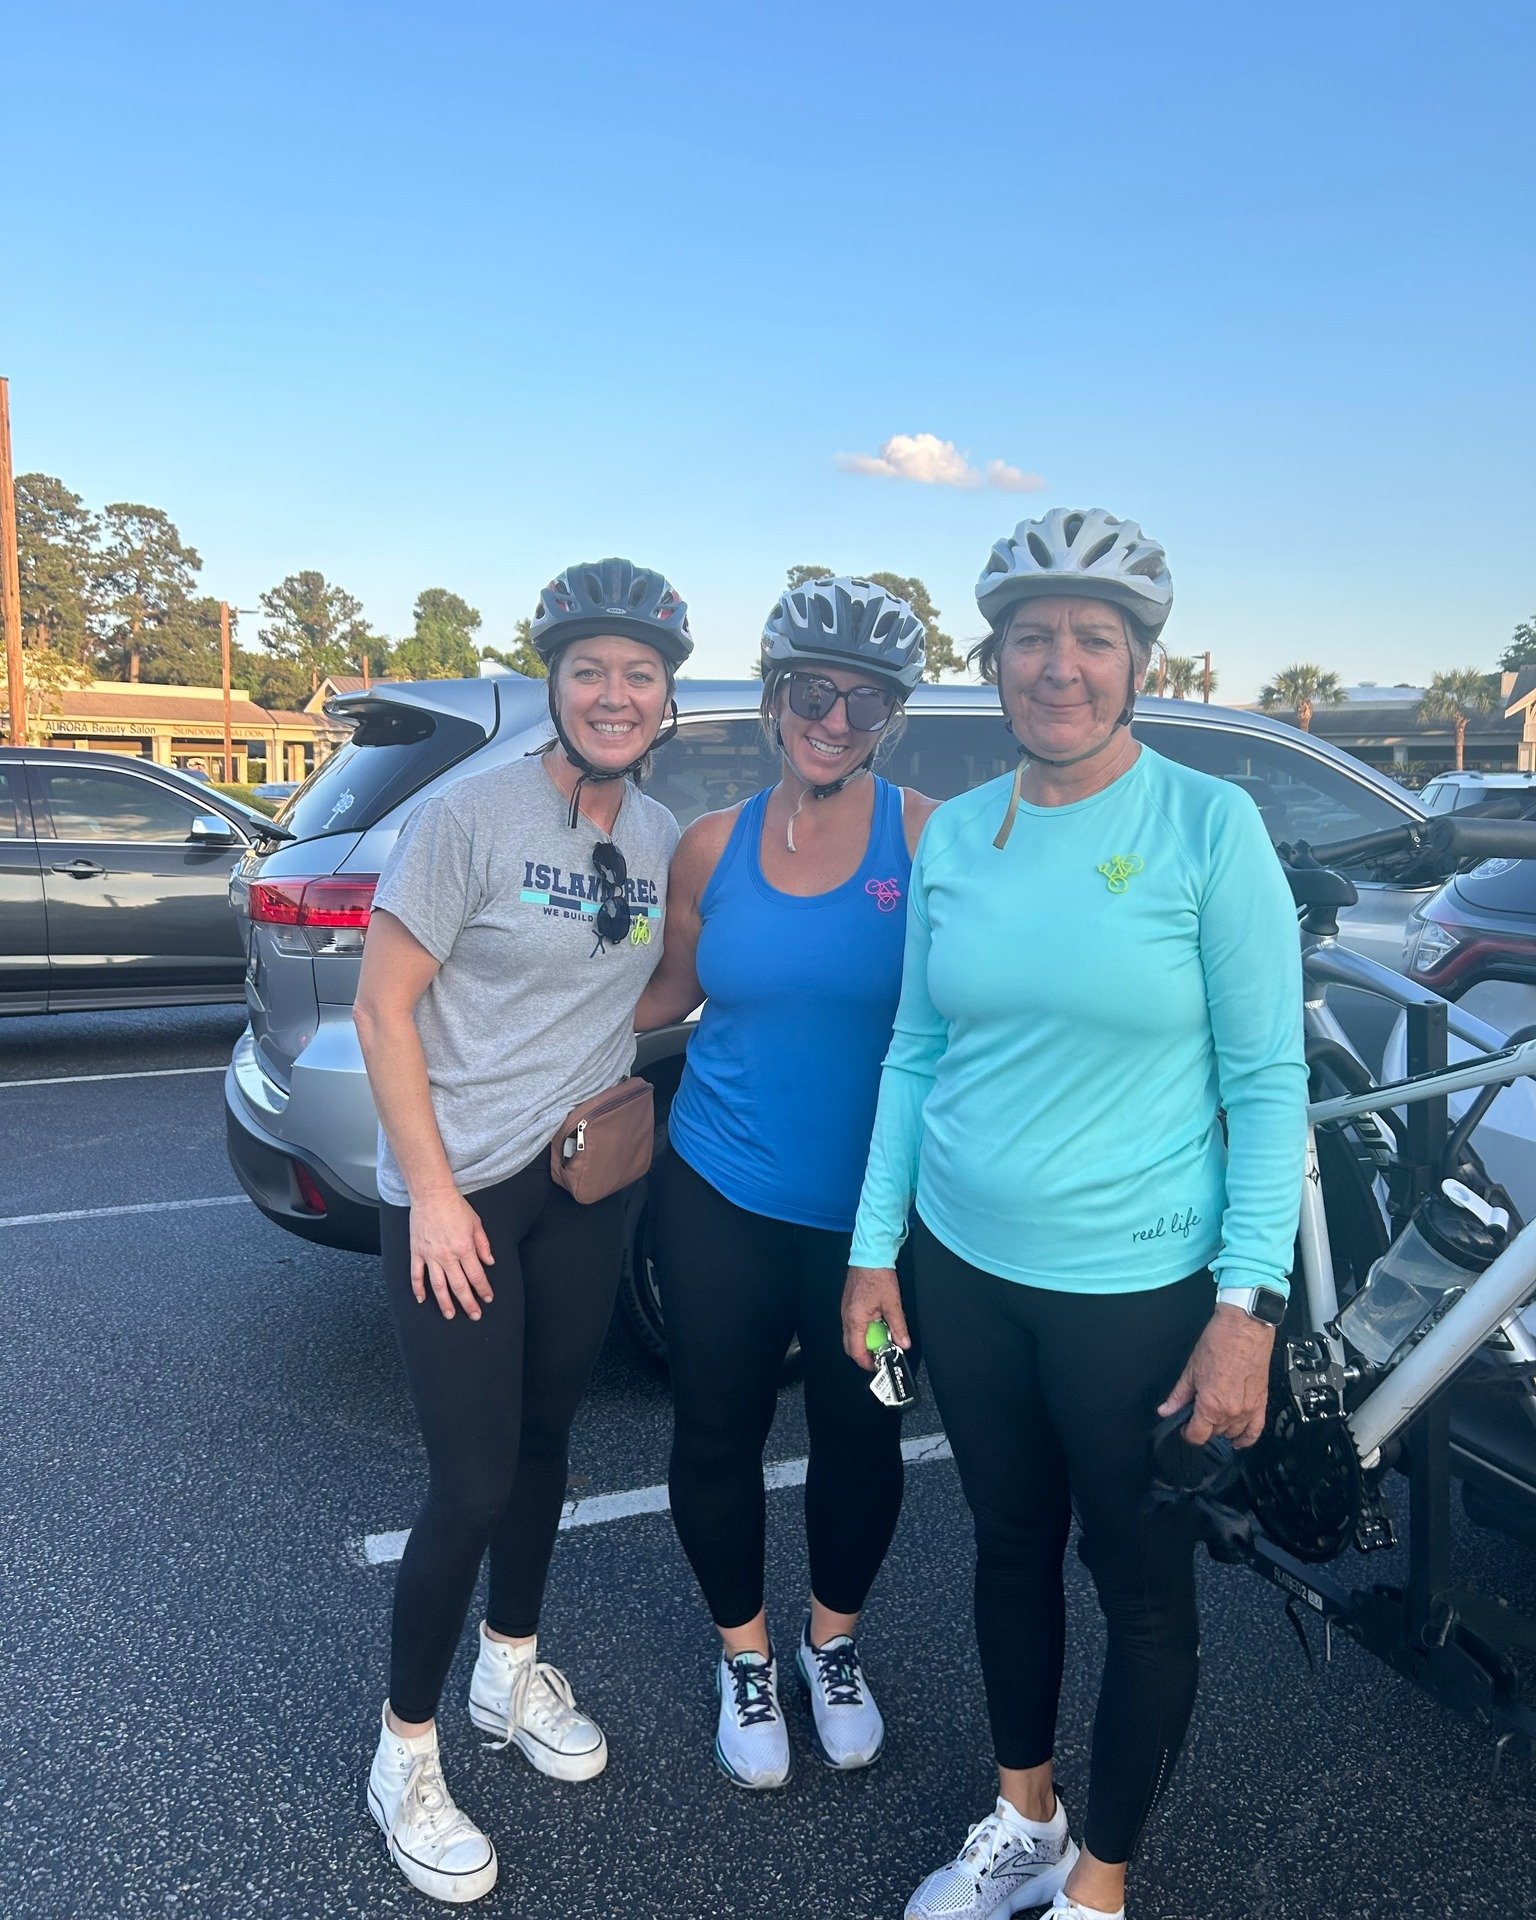 Yesterday 3 of our AMAZING staff members participated in the annual Ride of Silence to honor the cyclists who have been injured or killed while cycling on public roads.

For the rest of the month of May, if you are a member at the Island Rec Center a